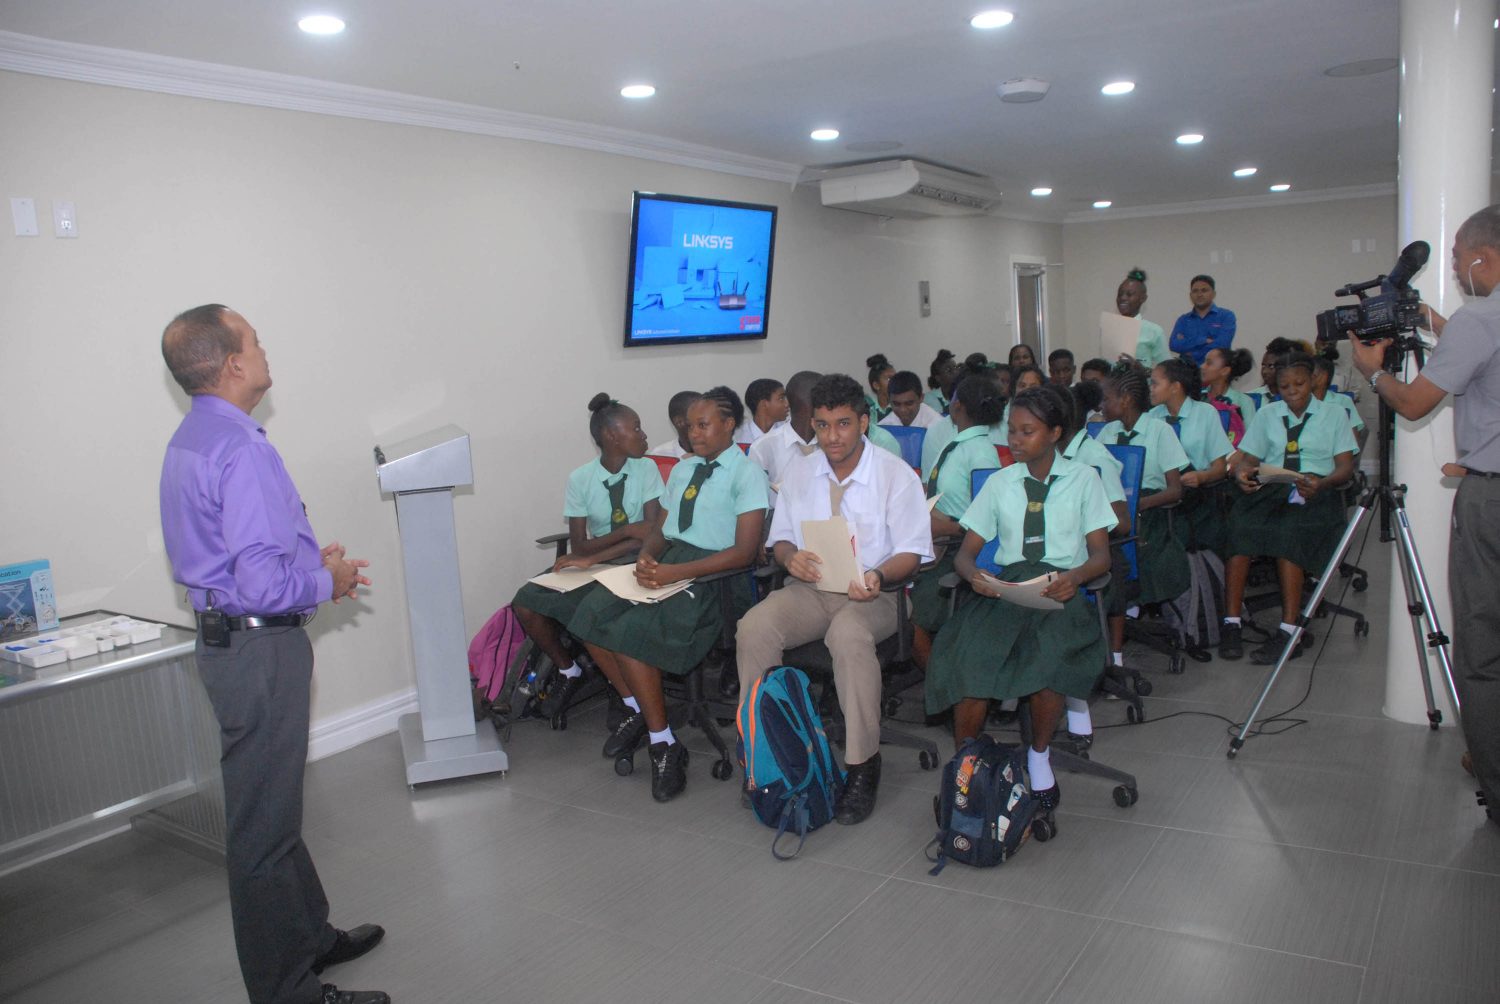 Starr CEO Michael Mohan addressing a group of students at the company’s brickdam complex earlier this week.